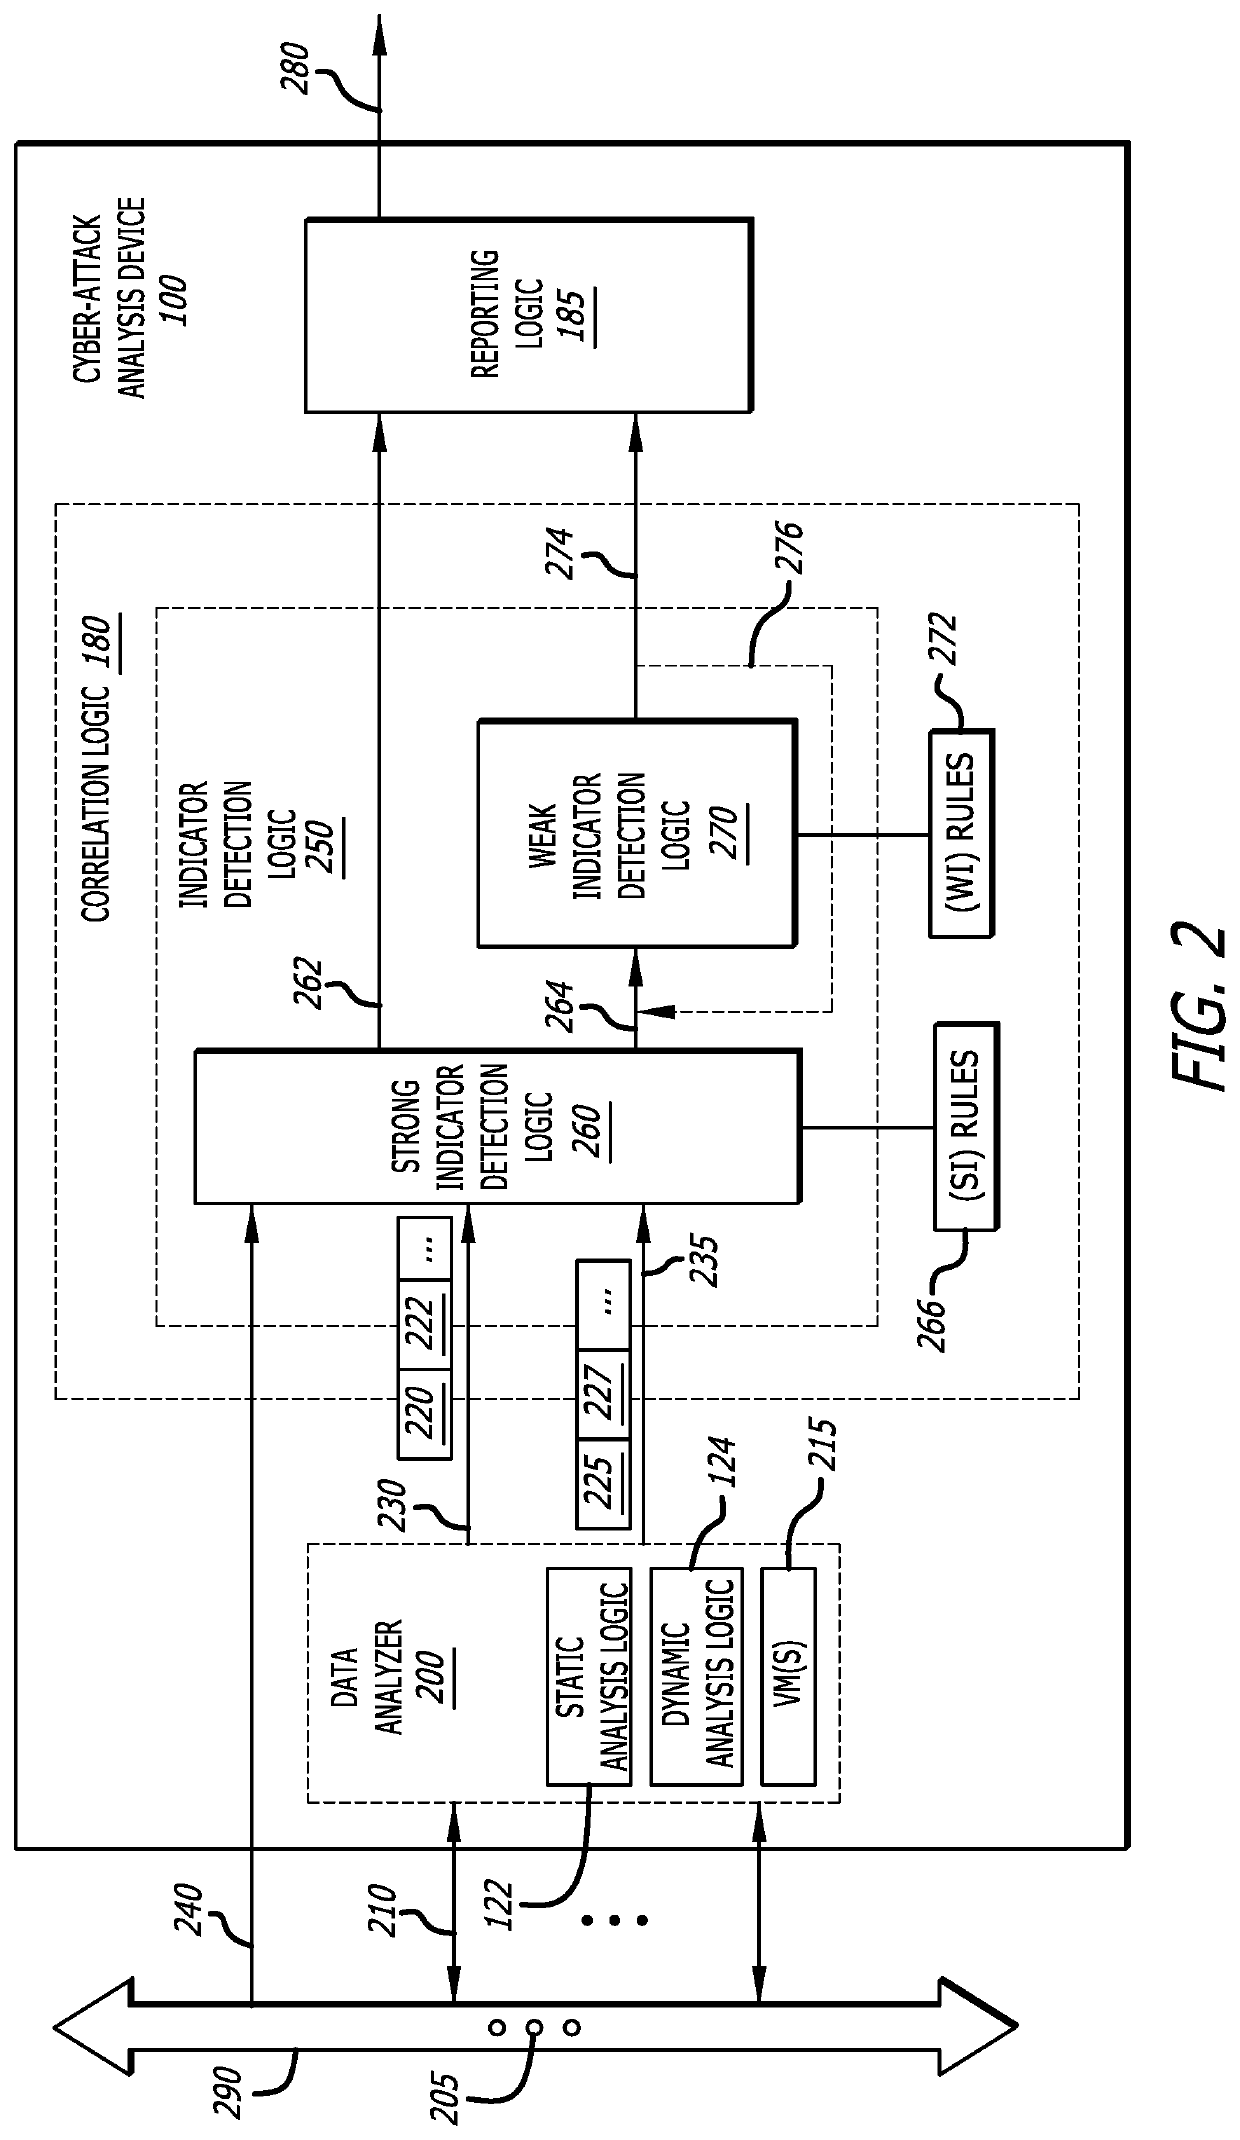 Cyber-security system and method for weak indicator detection and correlation to generate strong indicators